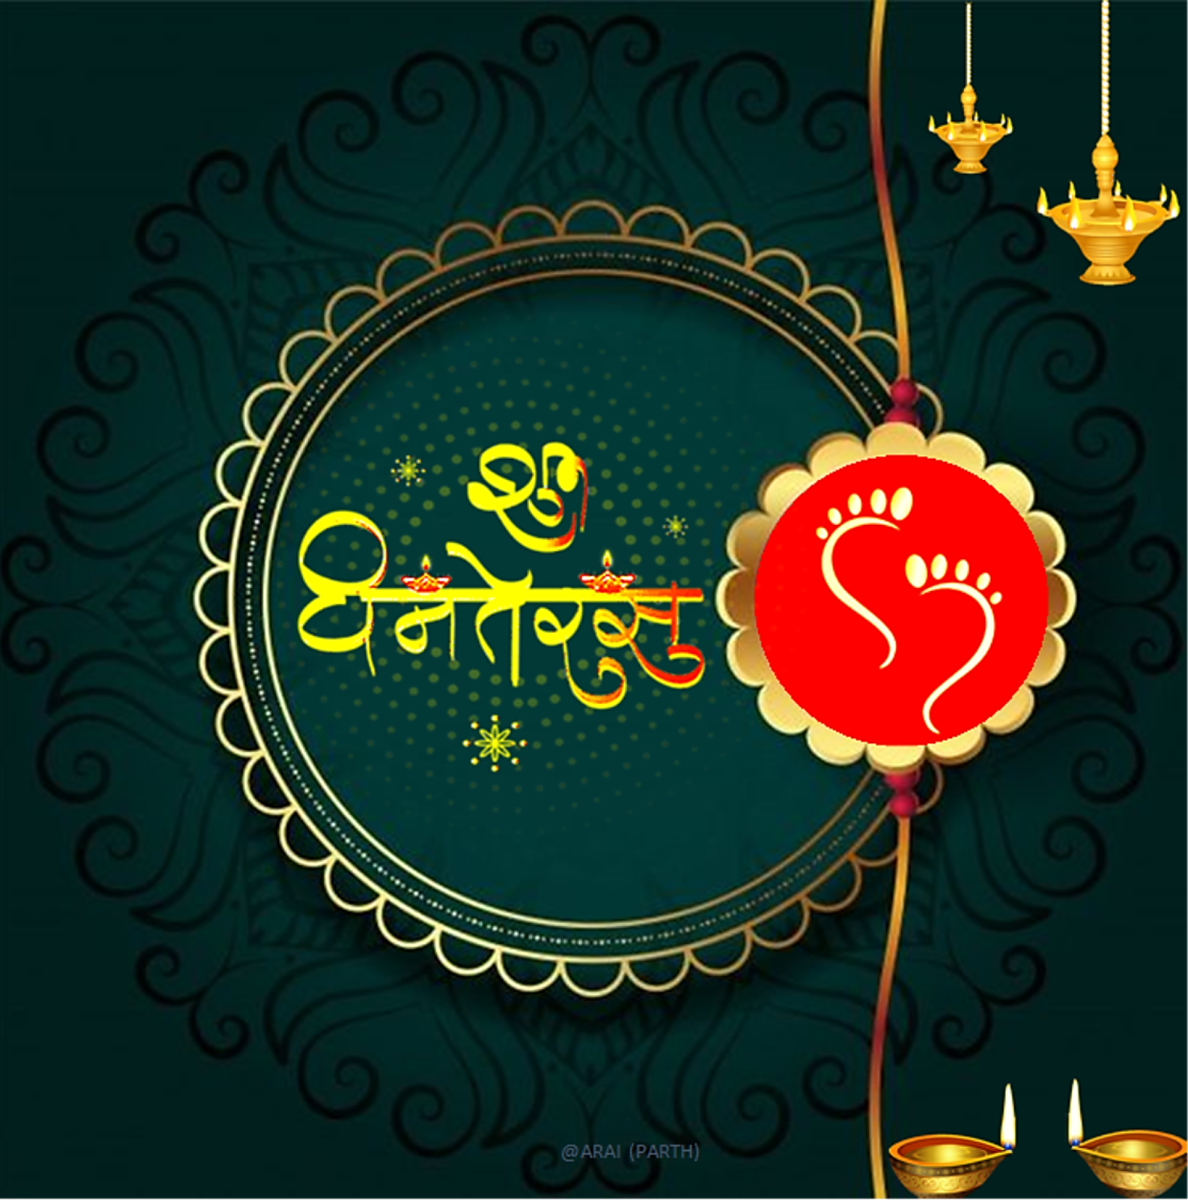 Dhanteras Wishes in Hindi